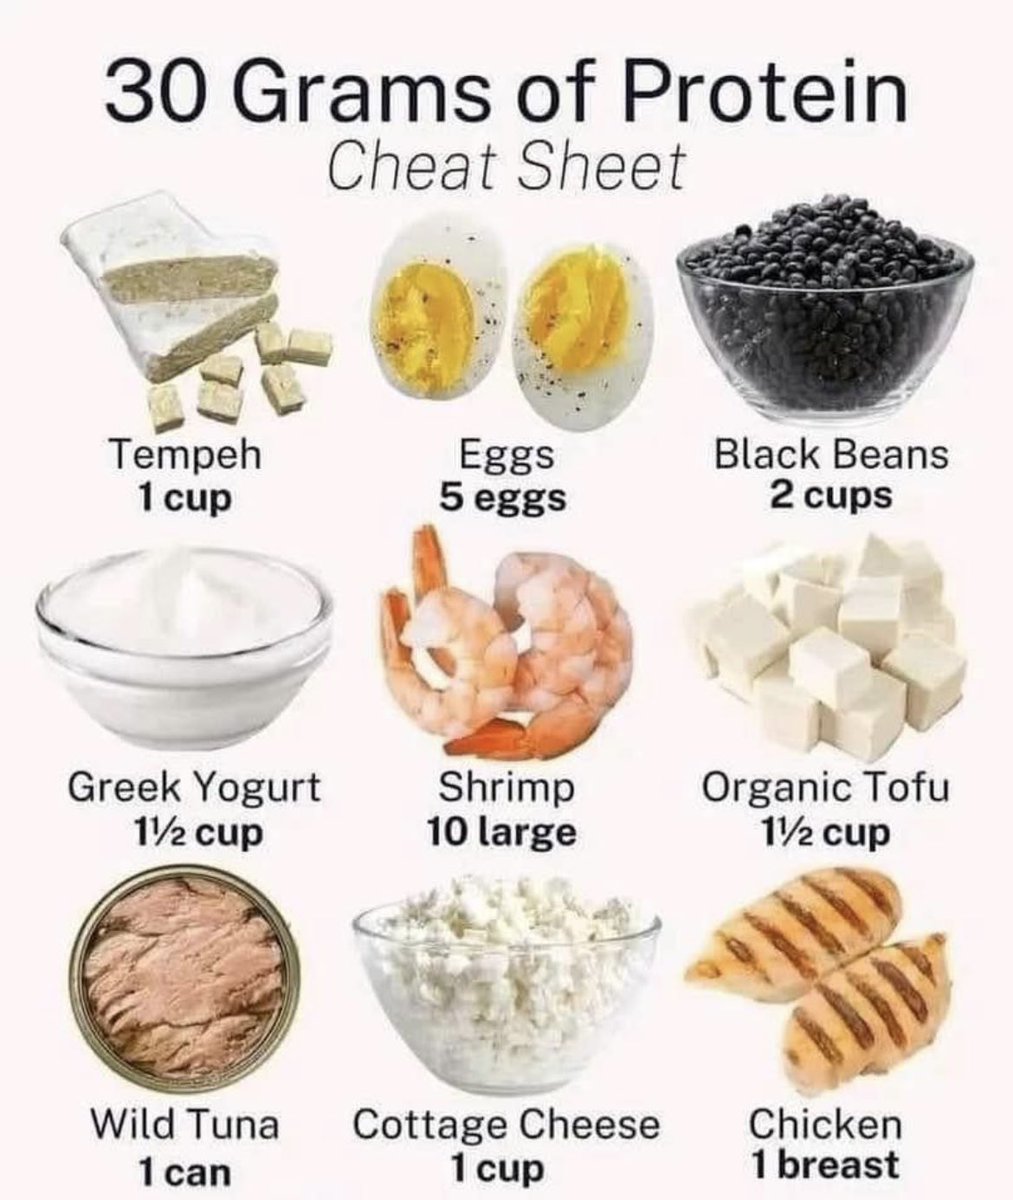 💪🏼 30 grams of Protein cheat sheet